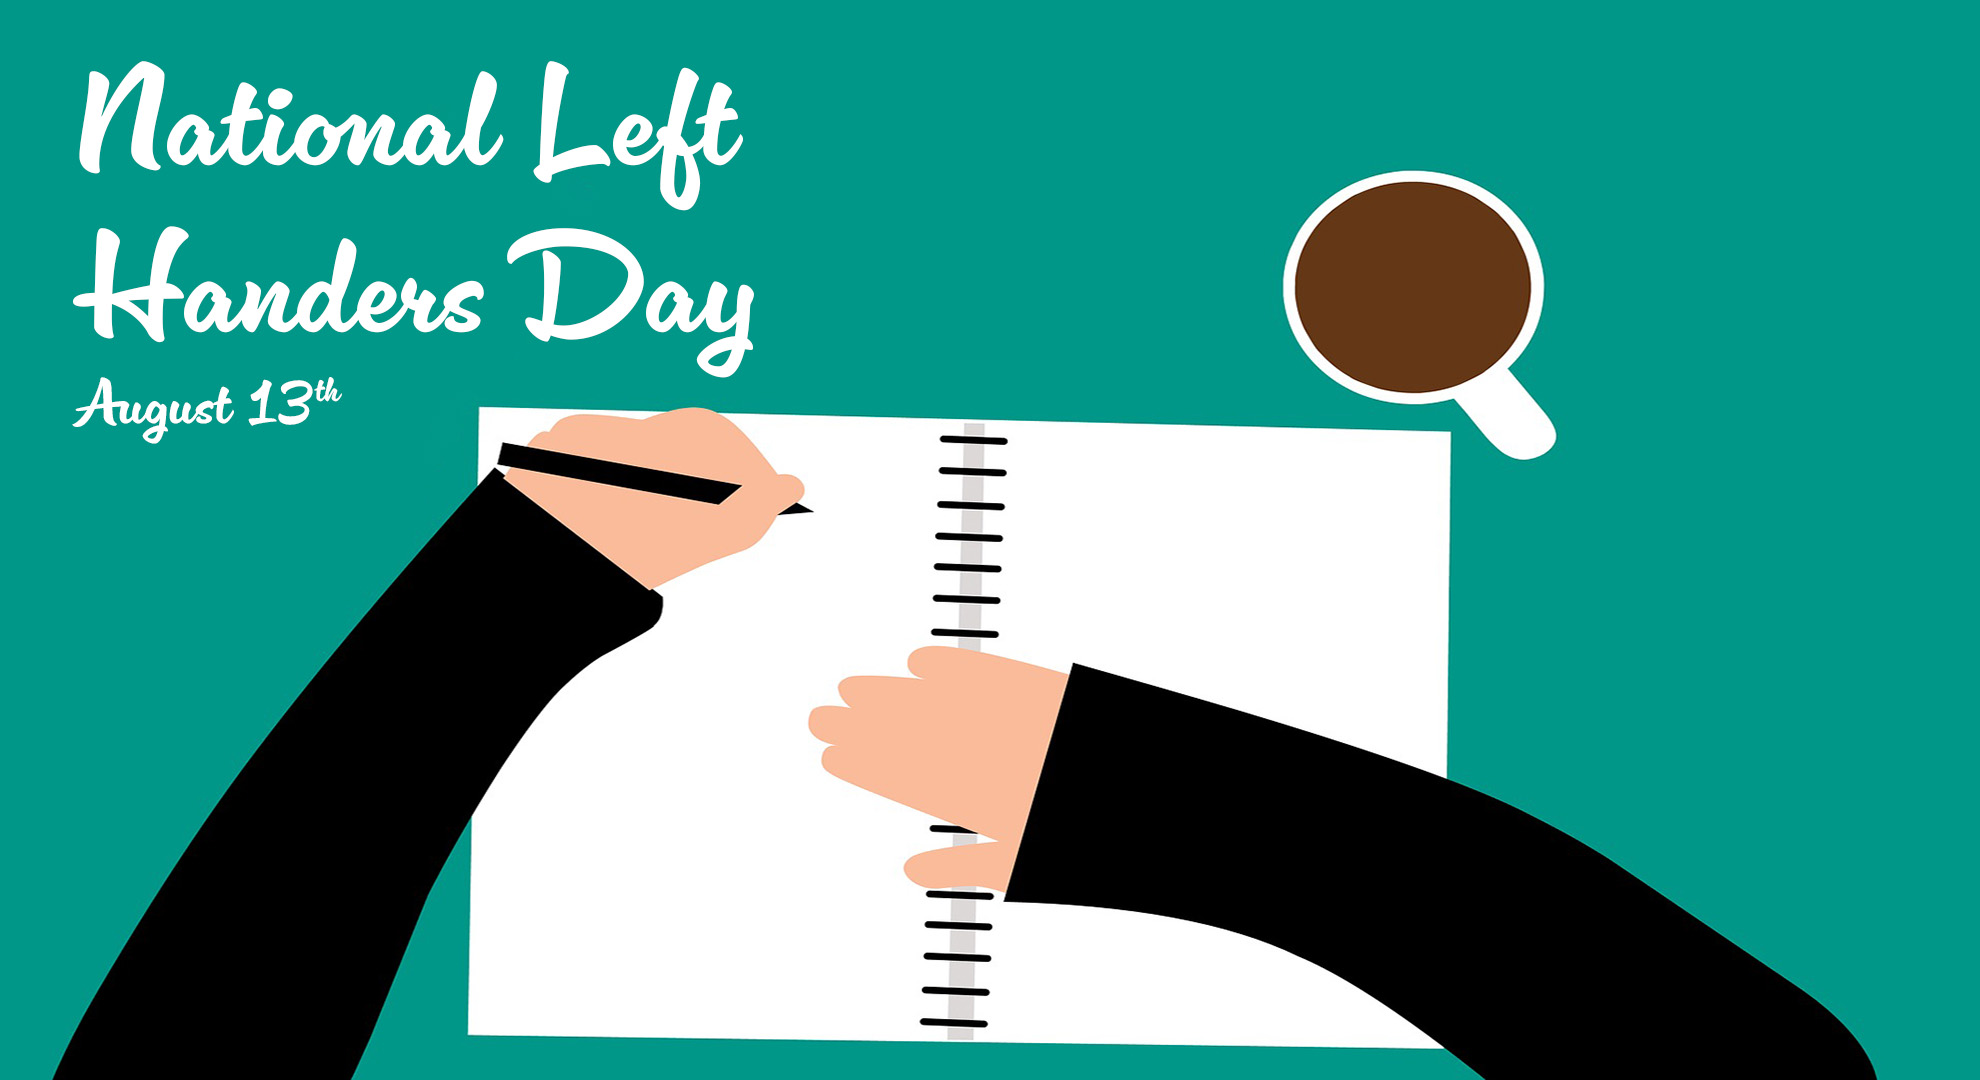 Graphic is a illustration of a overview looking down at someone's arms and hands writing in a notebook. The person writing is left handed and is writing in a notebook. On the top left of the screen National Left Handers Day August 13th is written in a white cursive font. To the top right of the image there is a full mug of coffee.